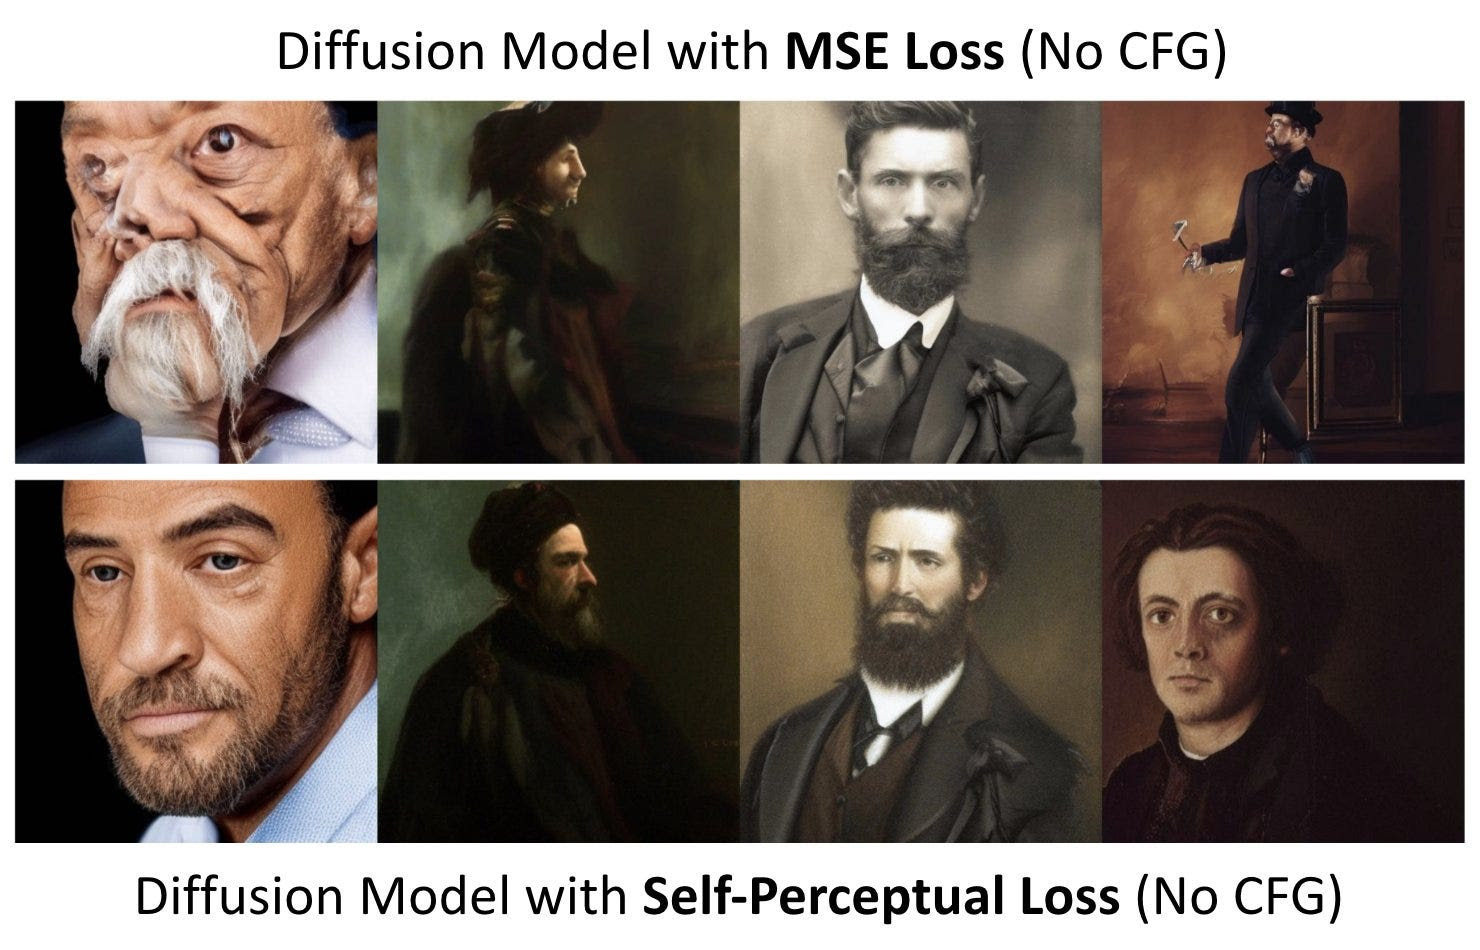 ByteDance introduces the Diffusion Model with perceptual loss